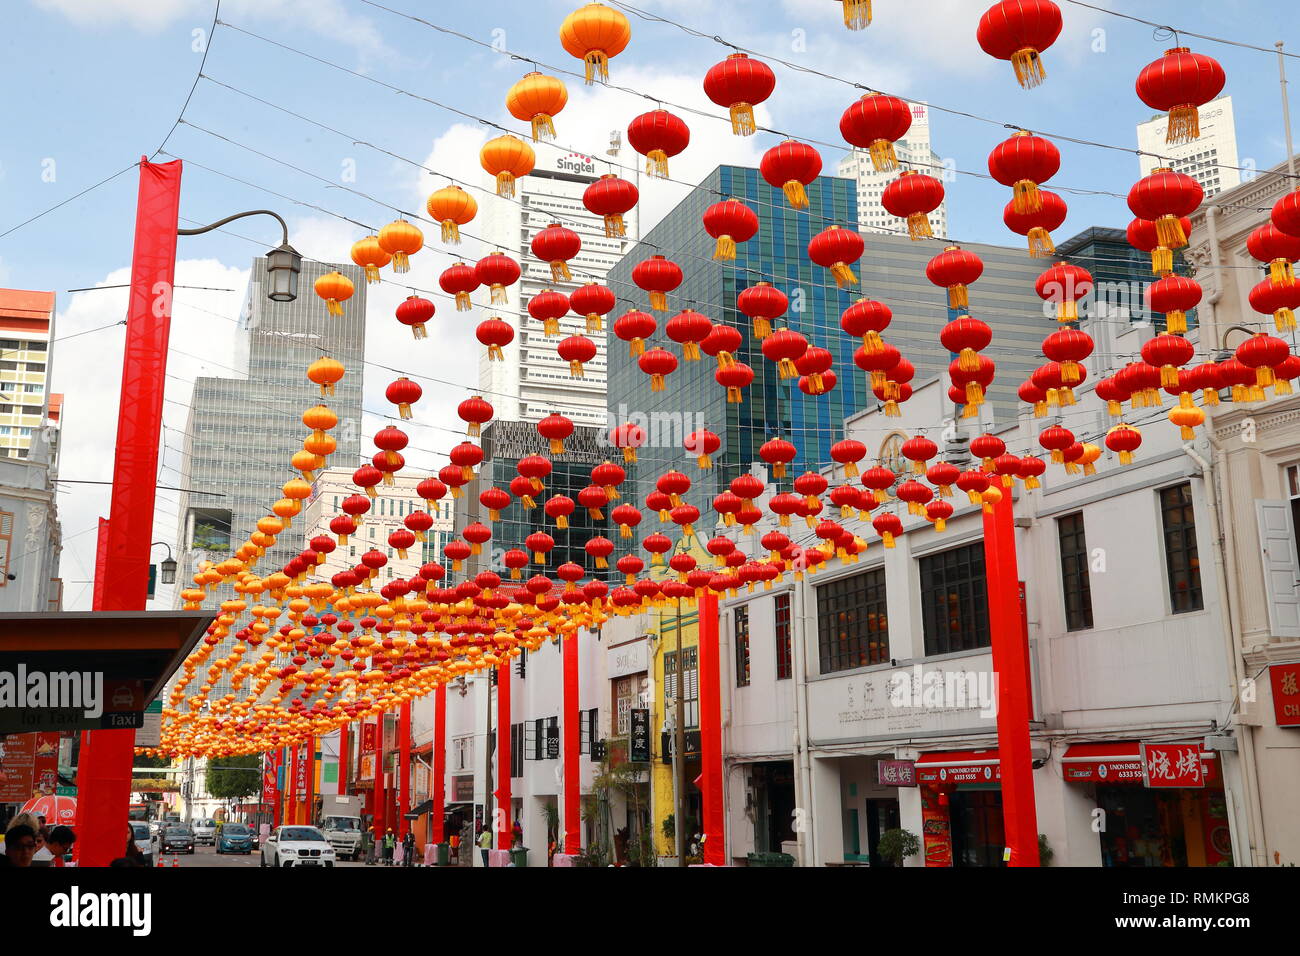 Sago Street is decorated with Chinese lanterns in anticipation of Chinese New Year, Singapore Stock Photo